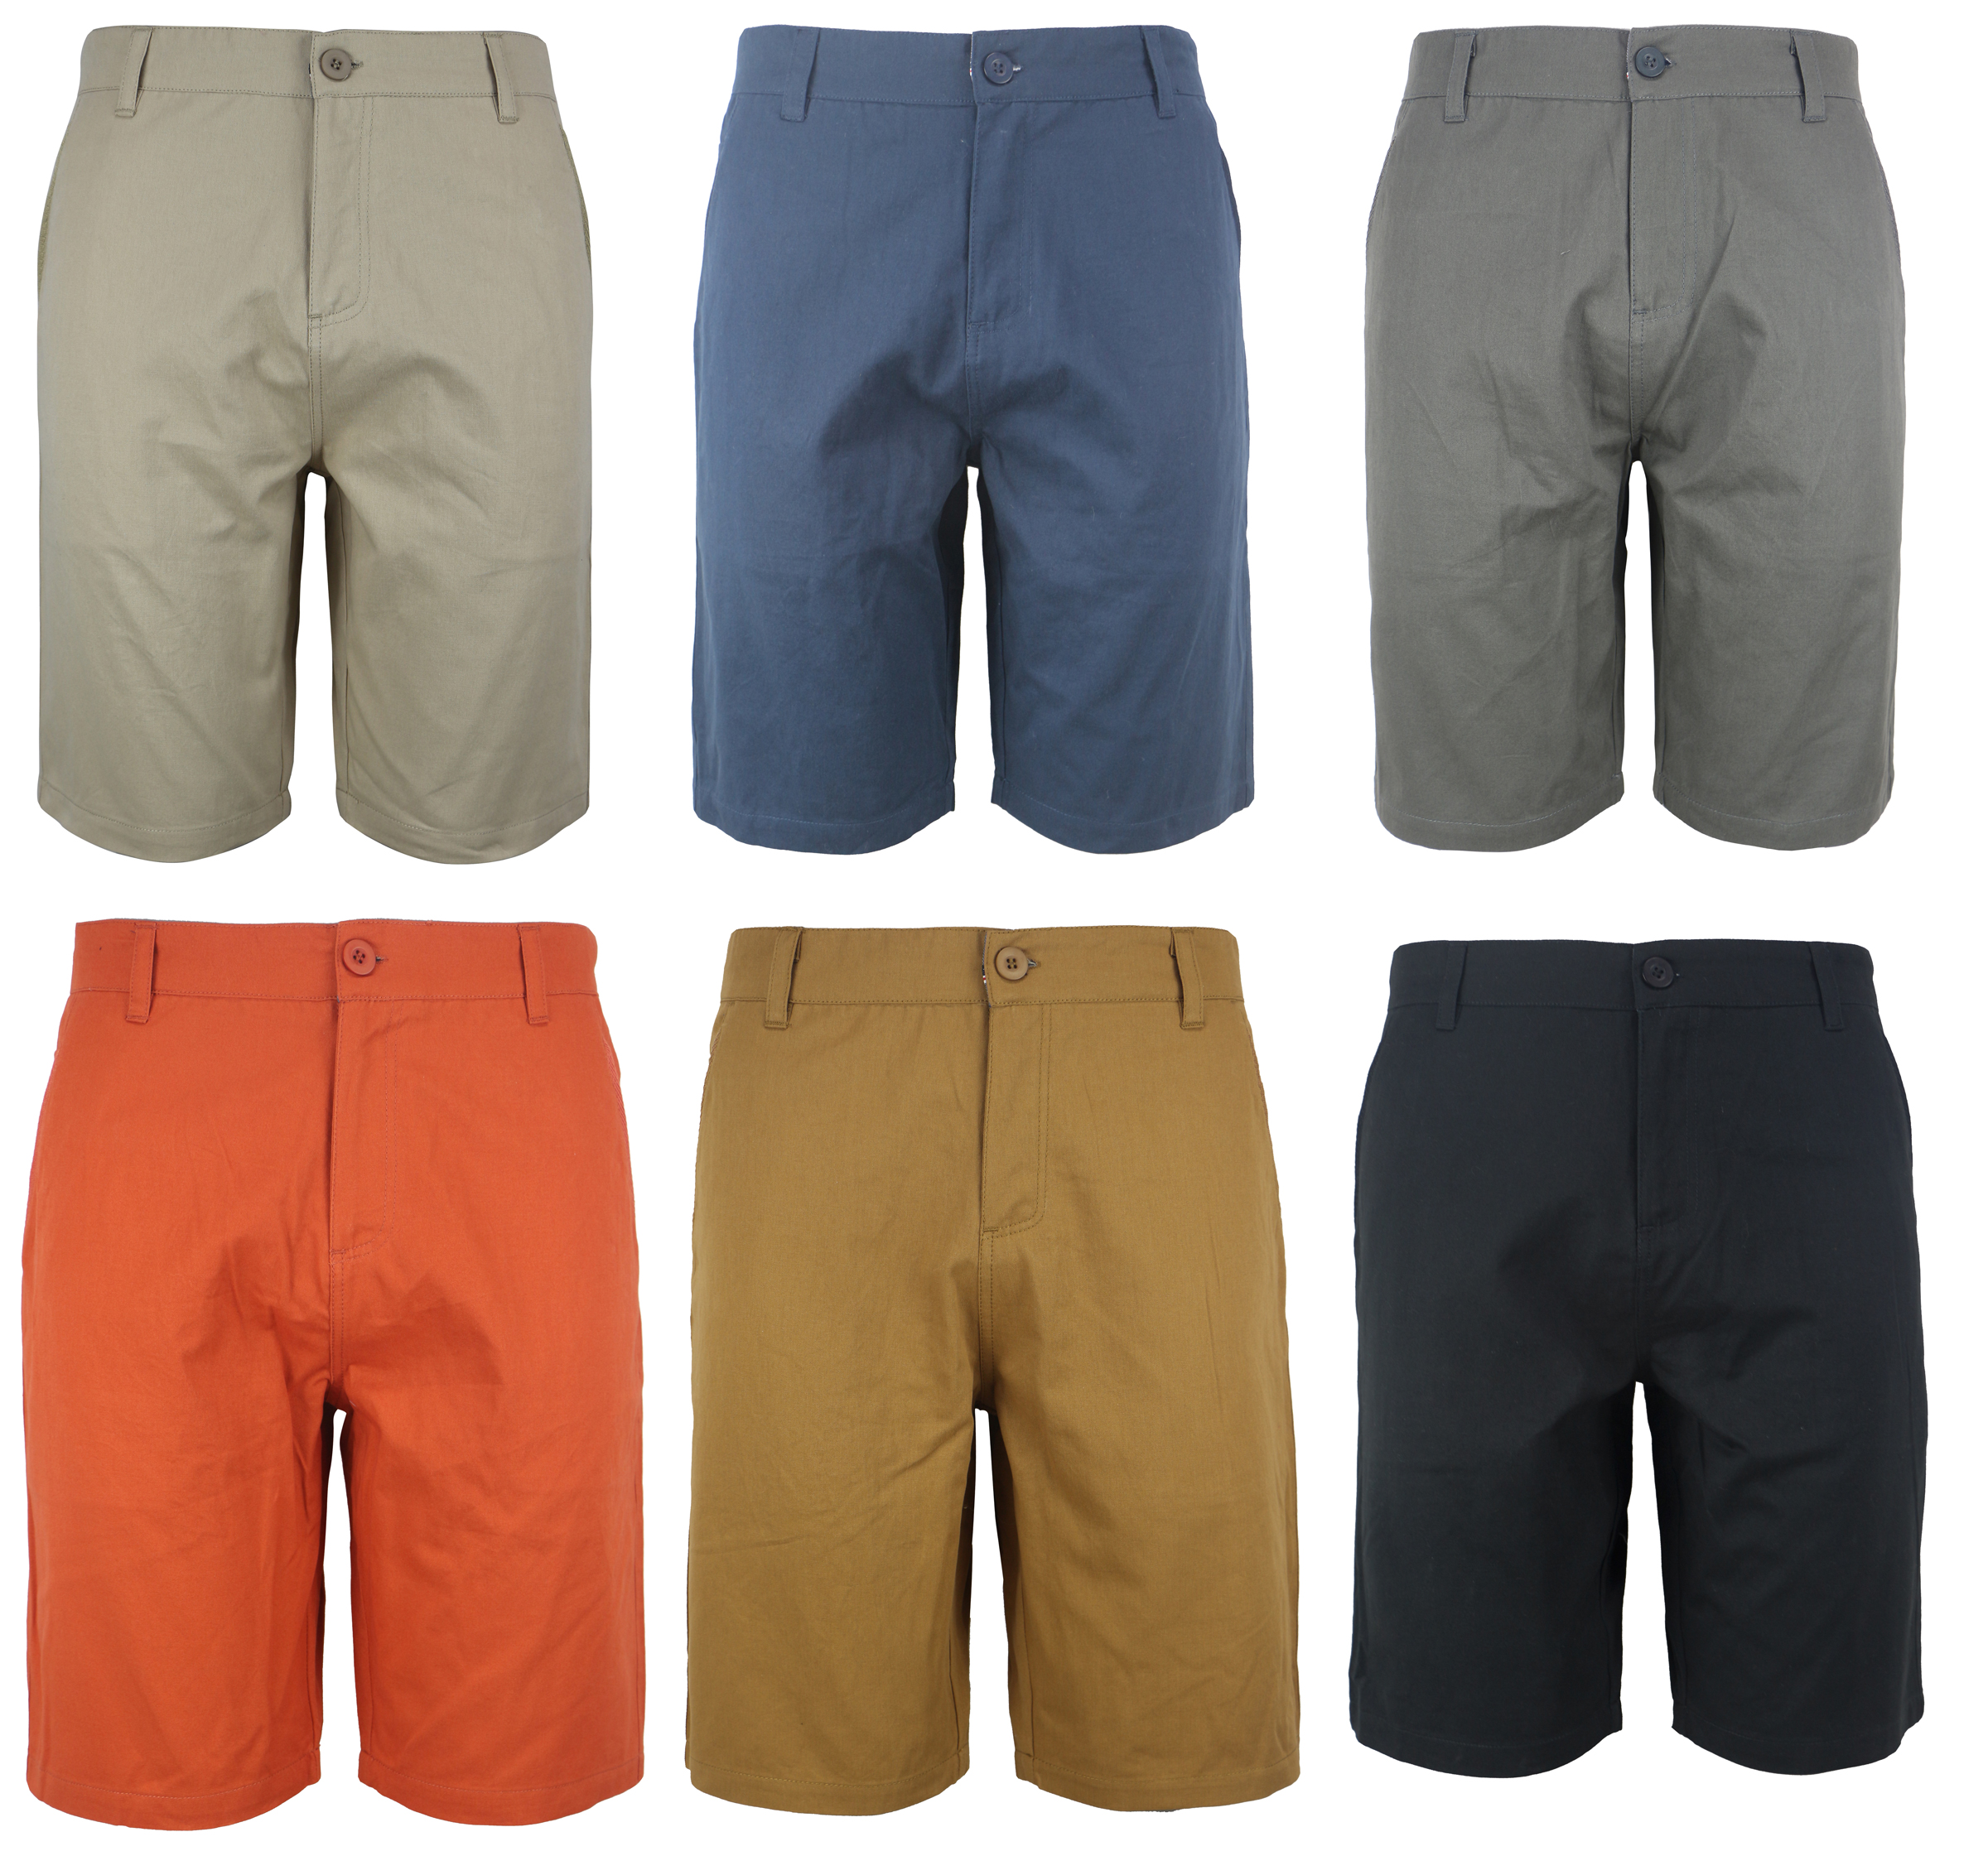 Men's Chino SHORTS w/ Front Side Pockets - Solid Colors - Sizes 30-40